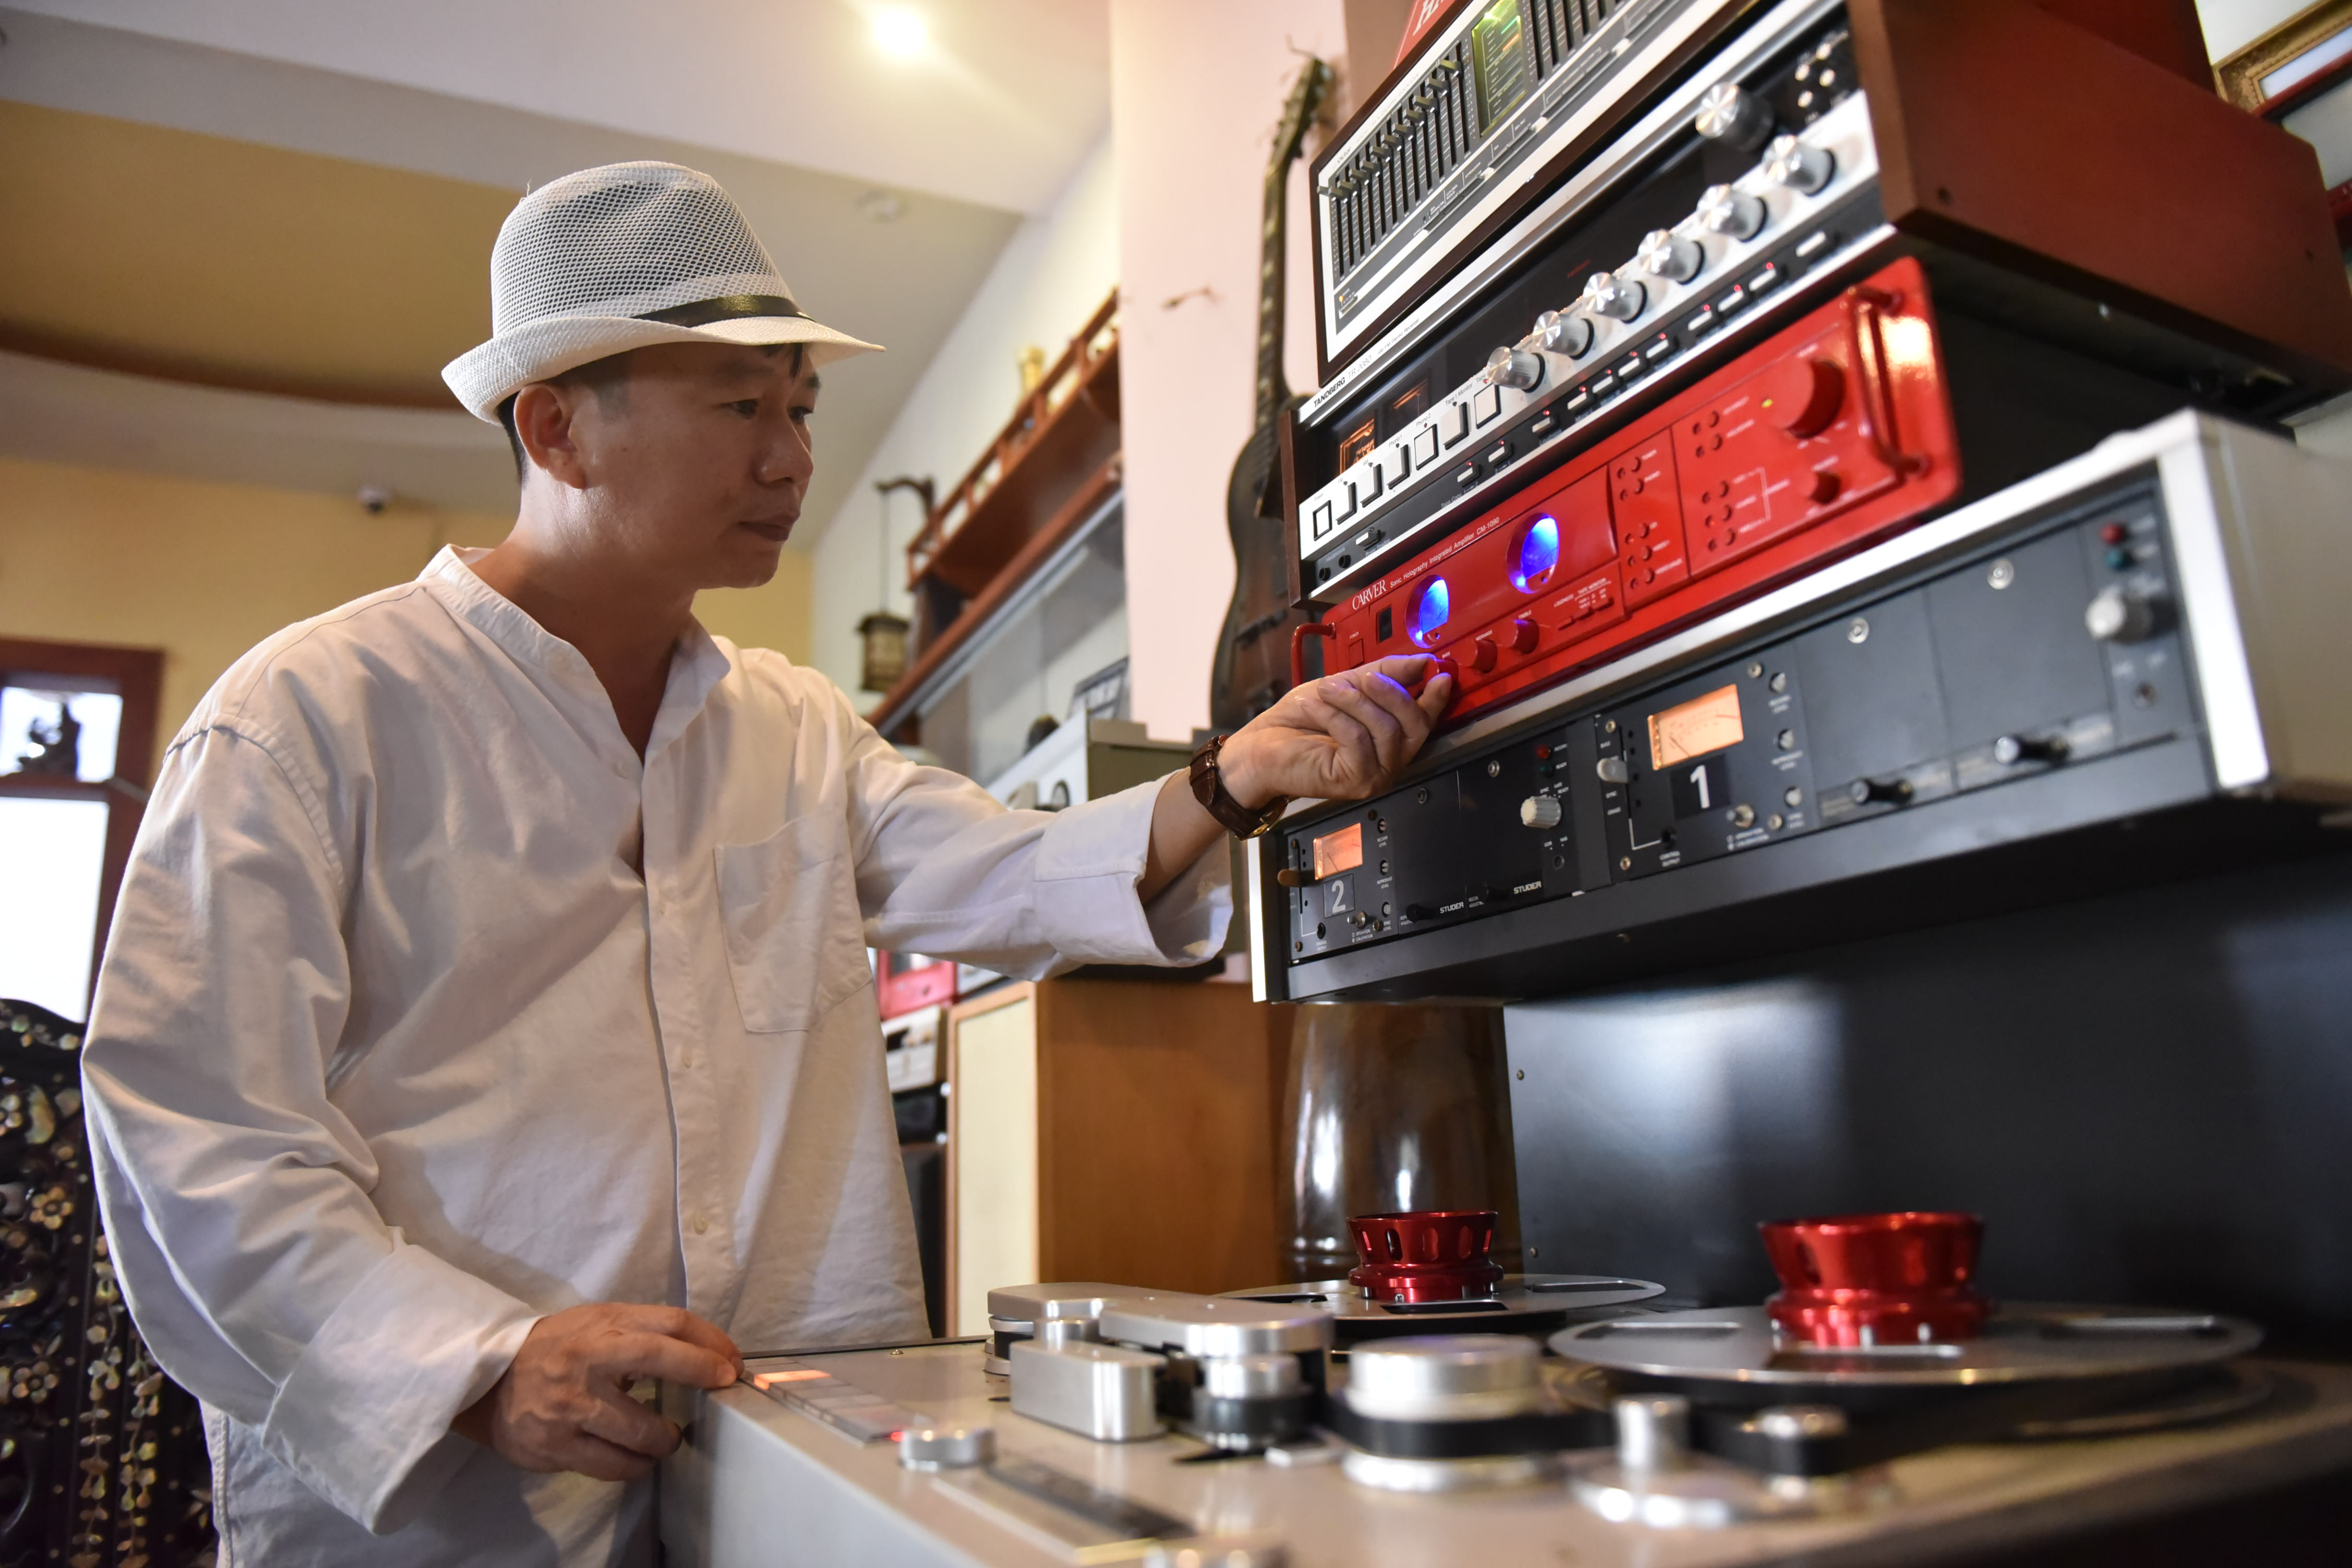 A Studer reel to reel tape recorder manufactured in 1980 fetches VND400 million. Photo: Ngoc Phuong / Tuoi Tre News